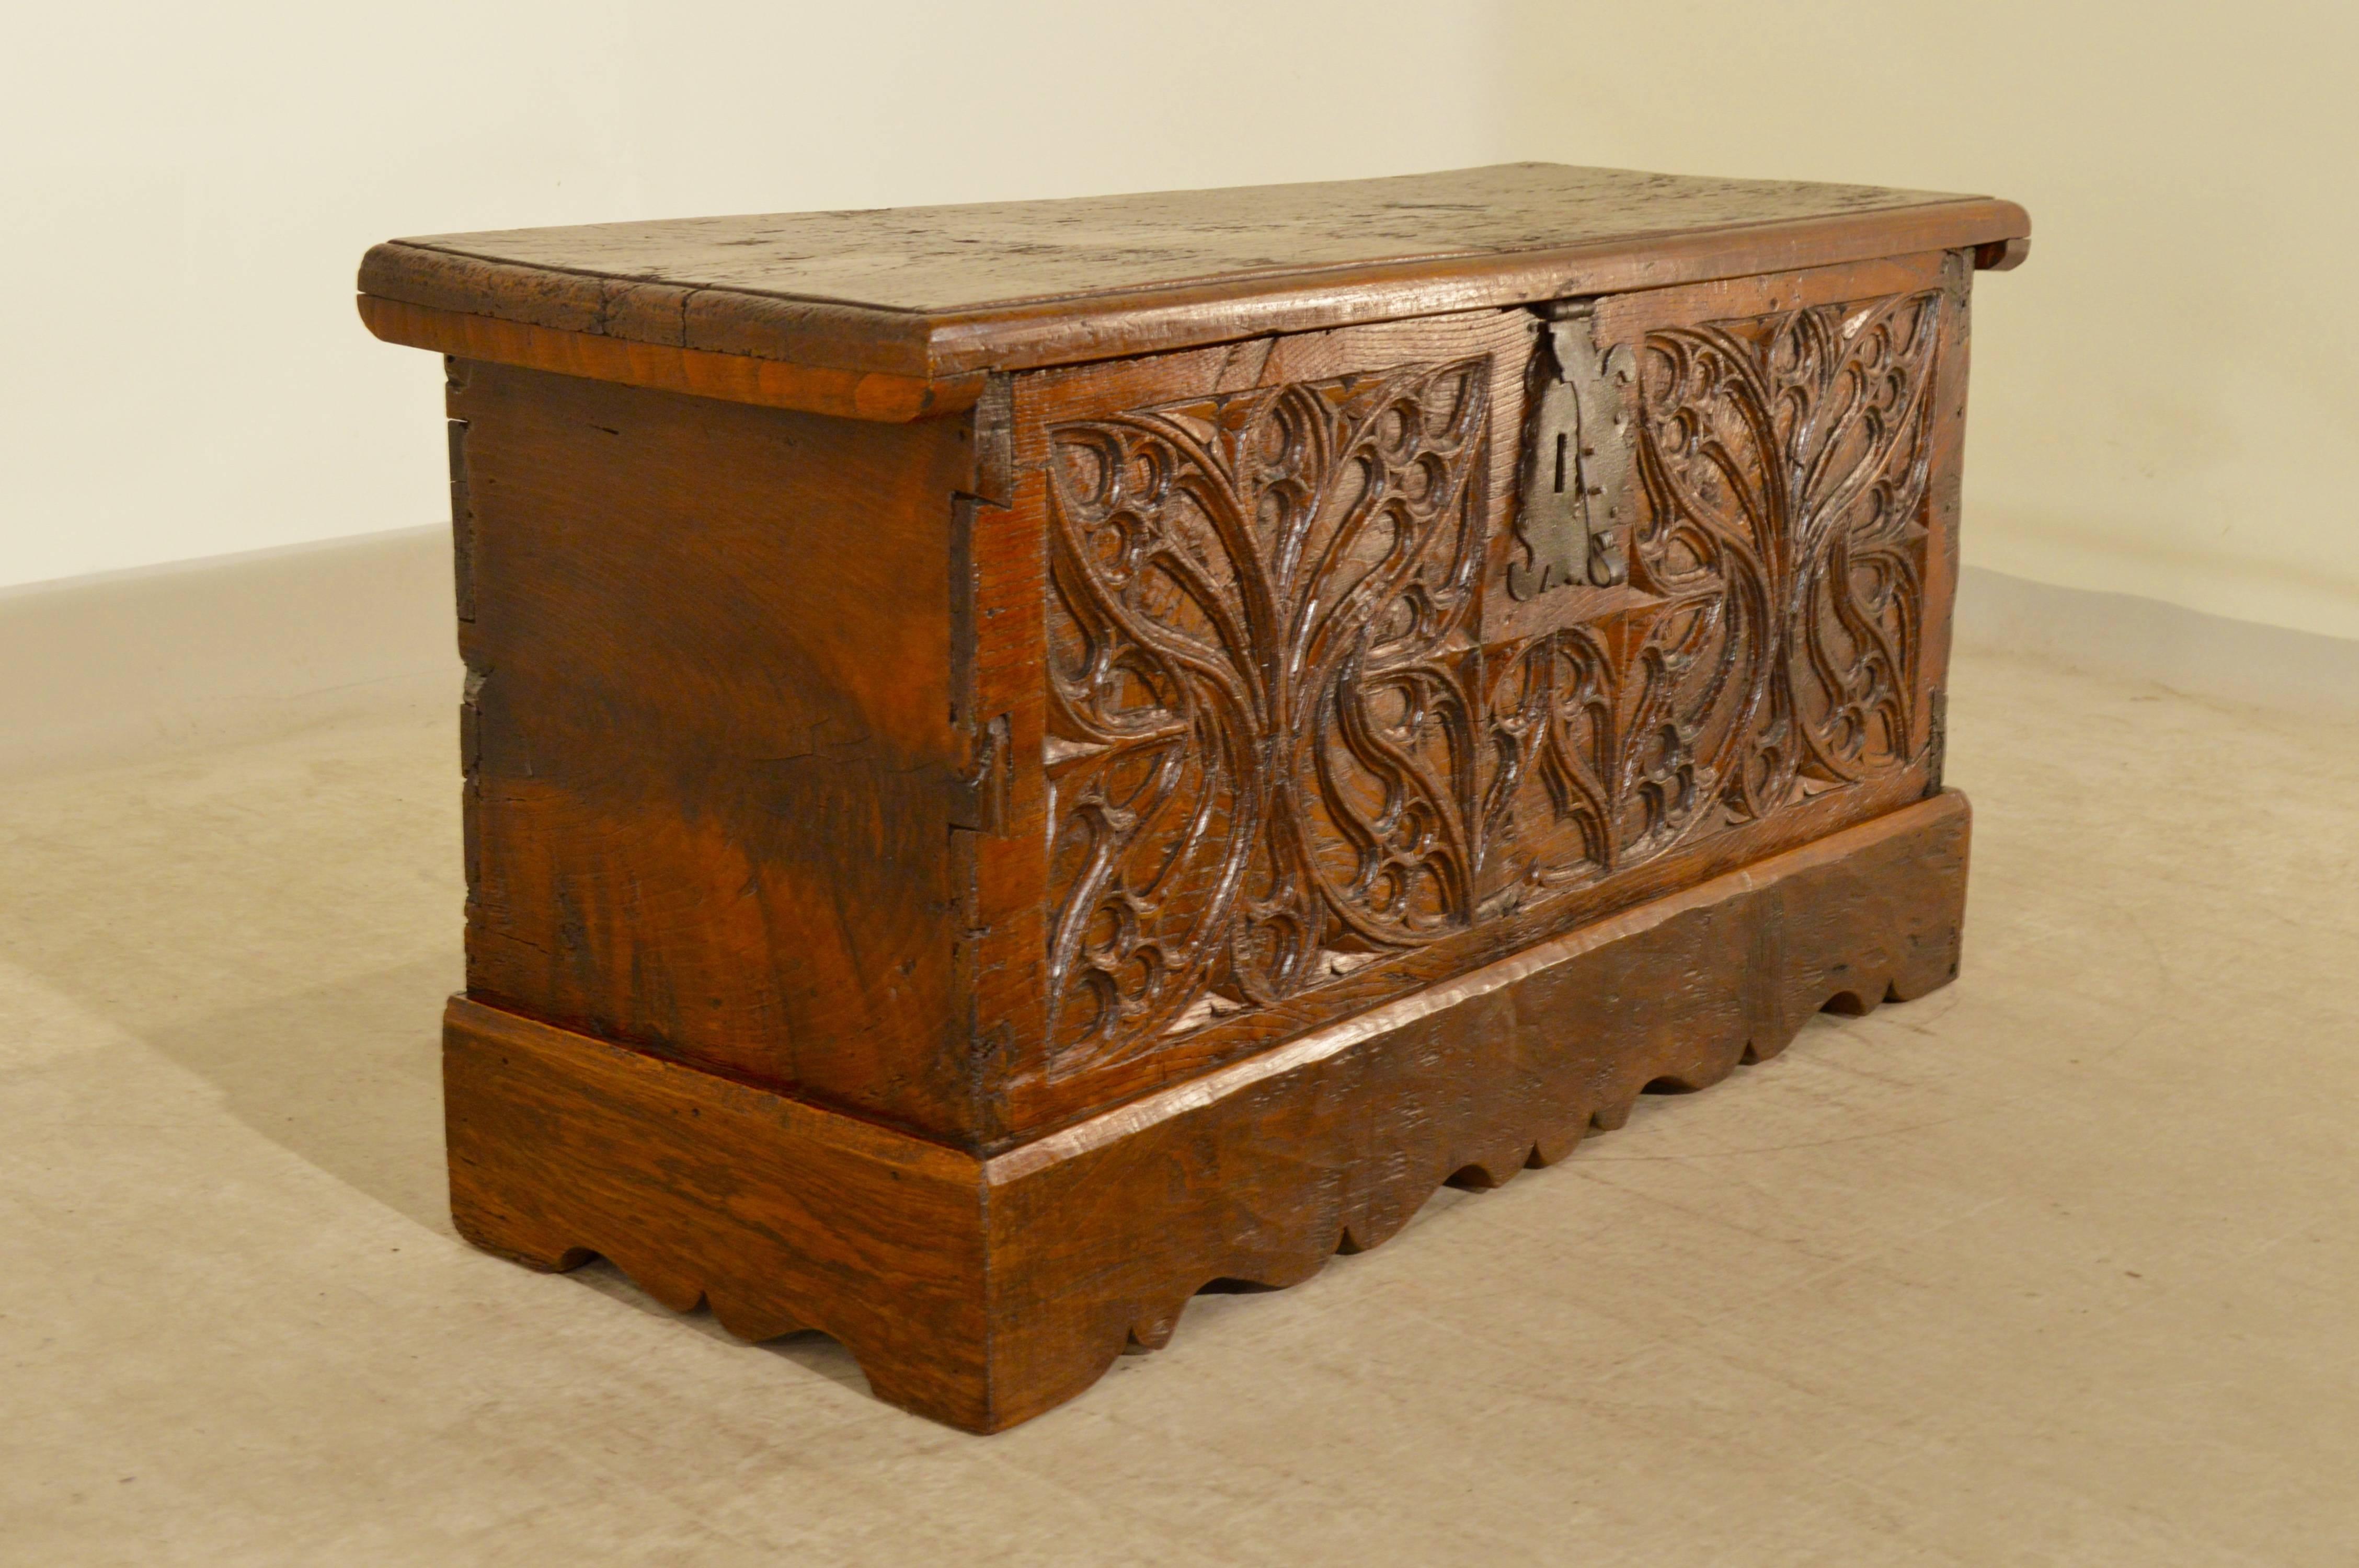 Early 17th century French blanket chest made from walnut. The top is made from a single plank of wood with a beveled edge. The piece is made up of five single planks, the front one being wonderfully deeply carved and resting on a hand scalloped base.